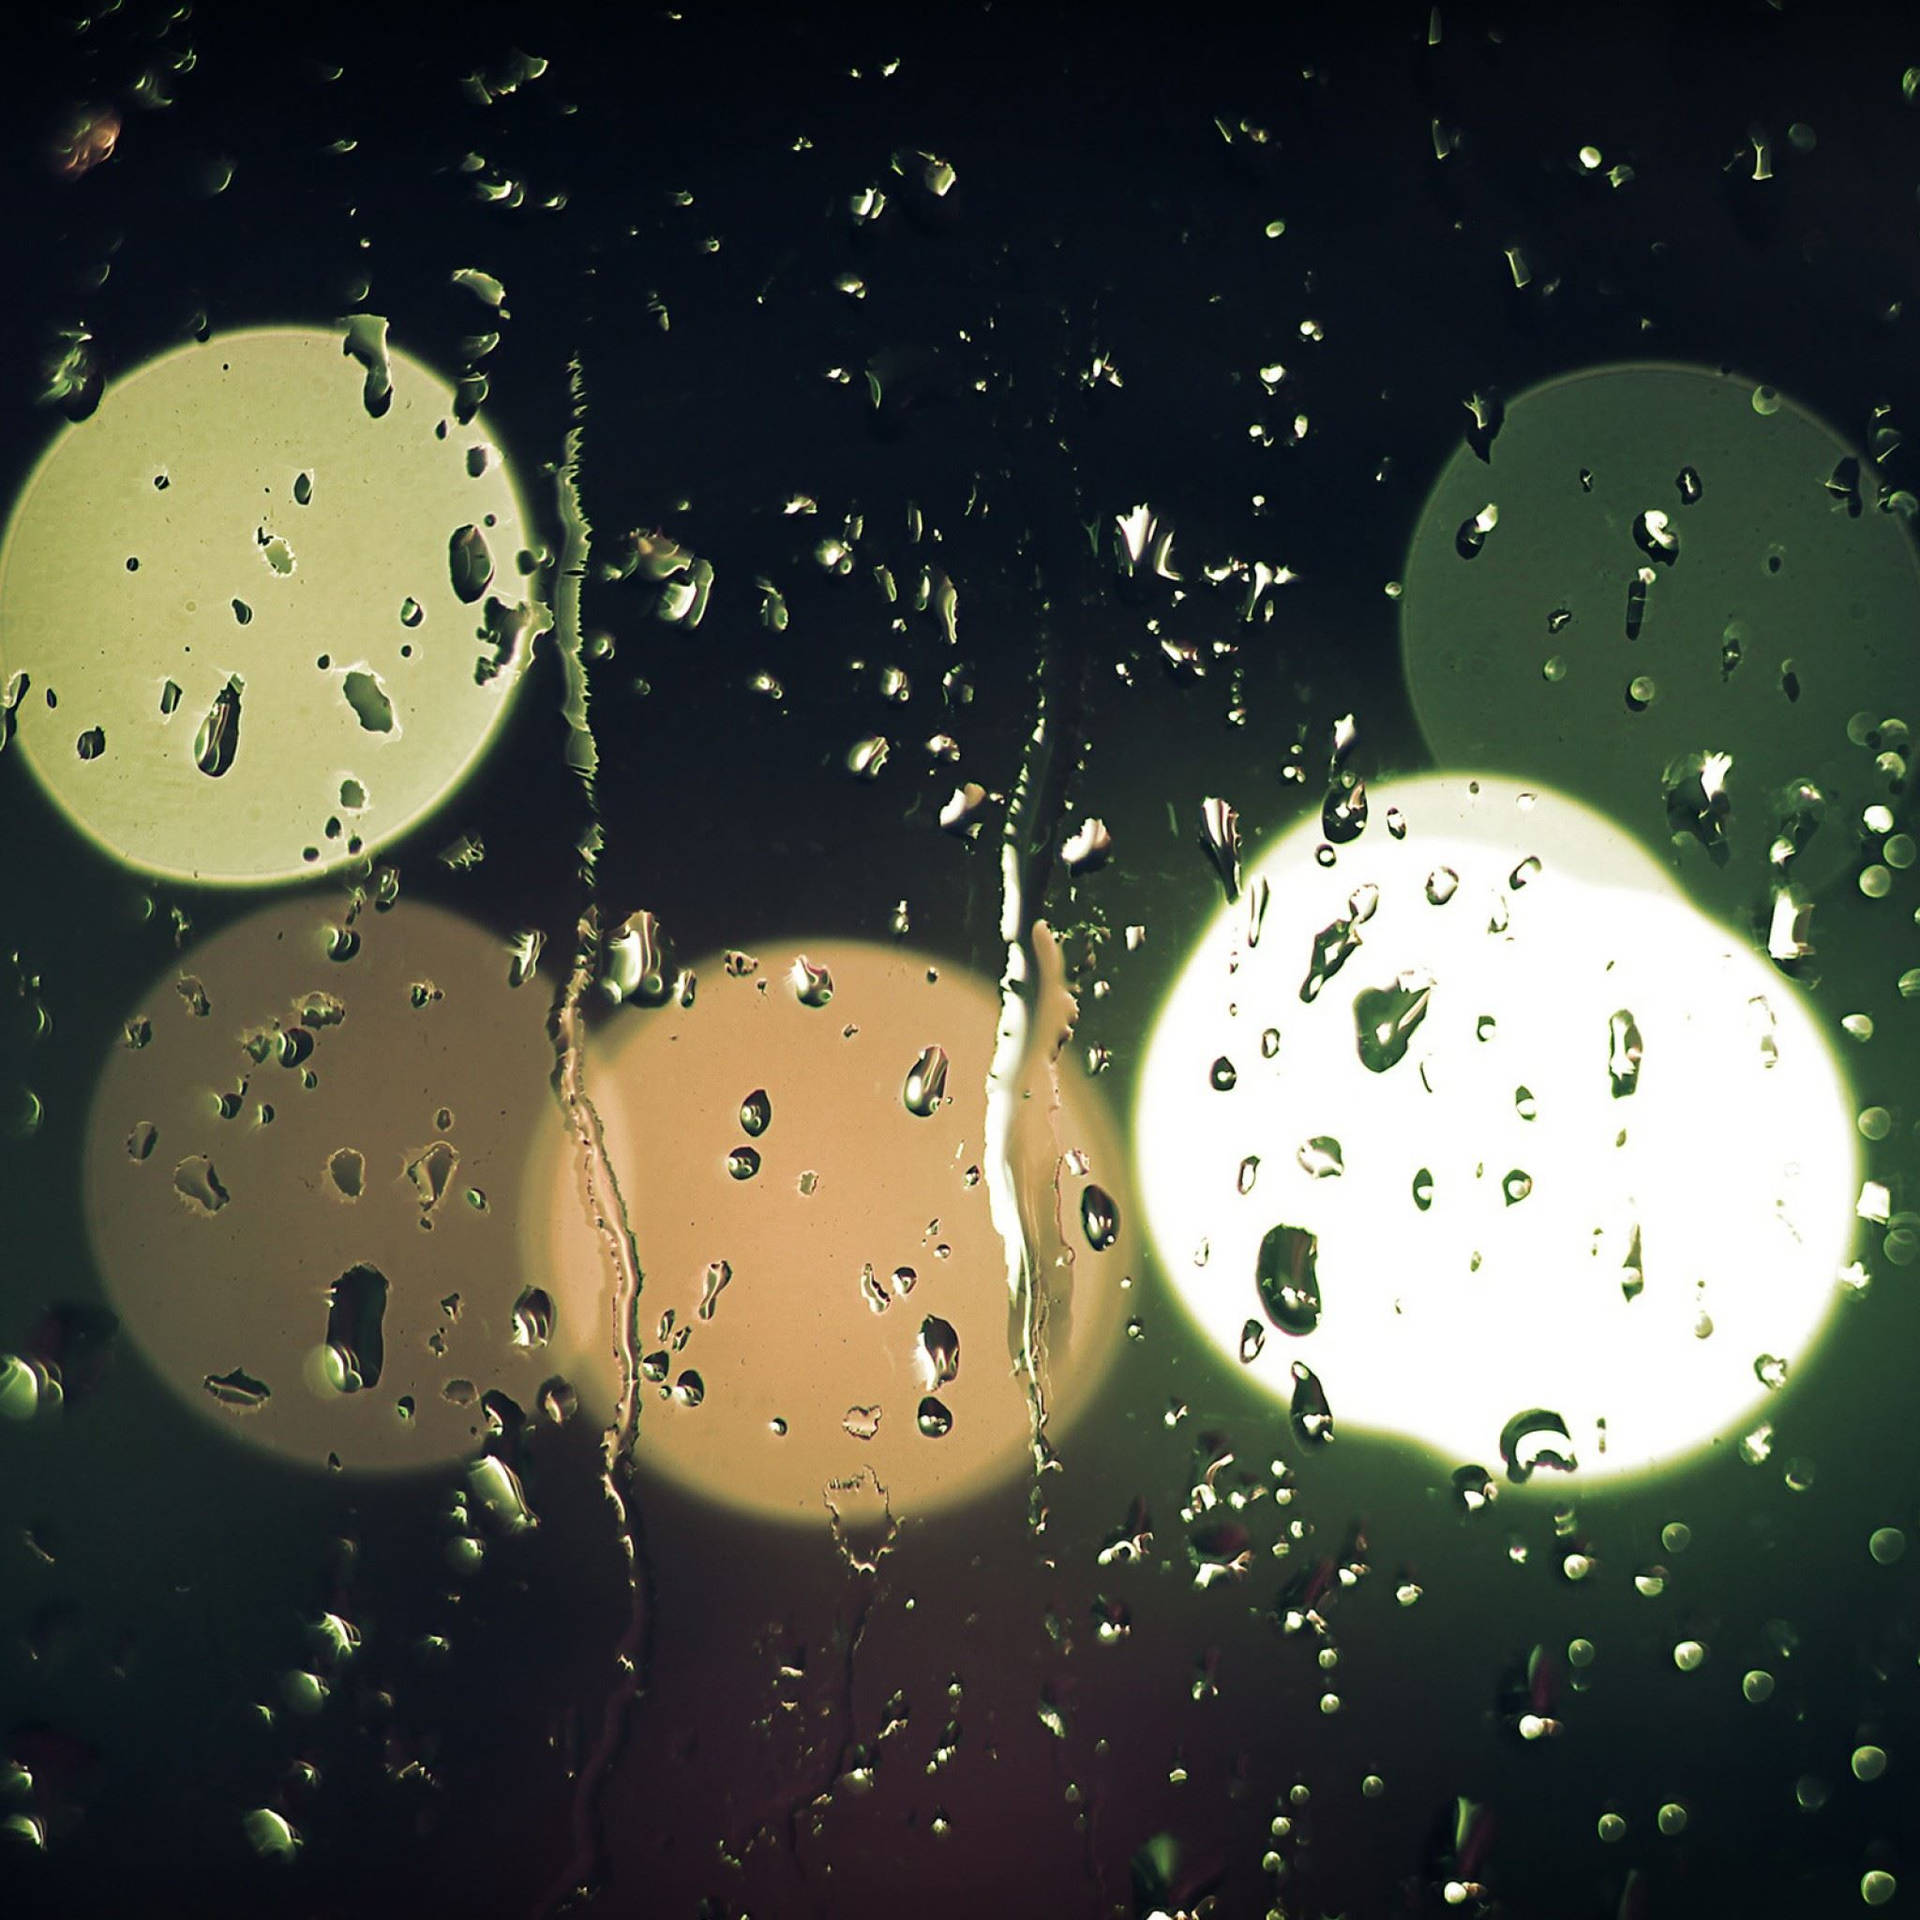 Falling Raindrops With Colorful Light Orbs